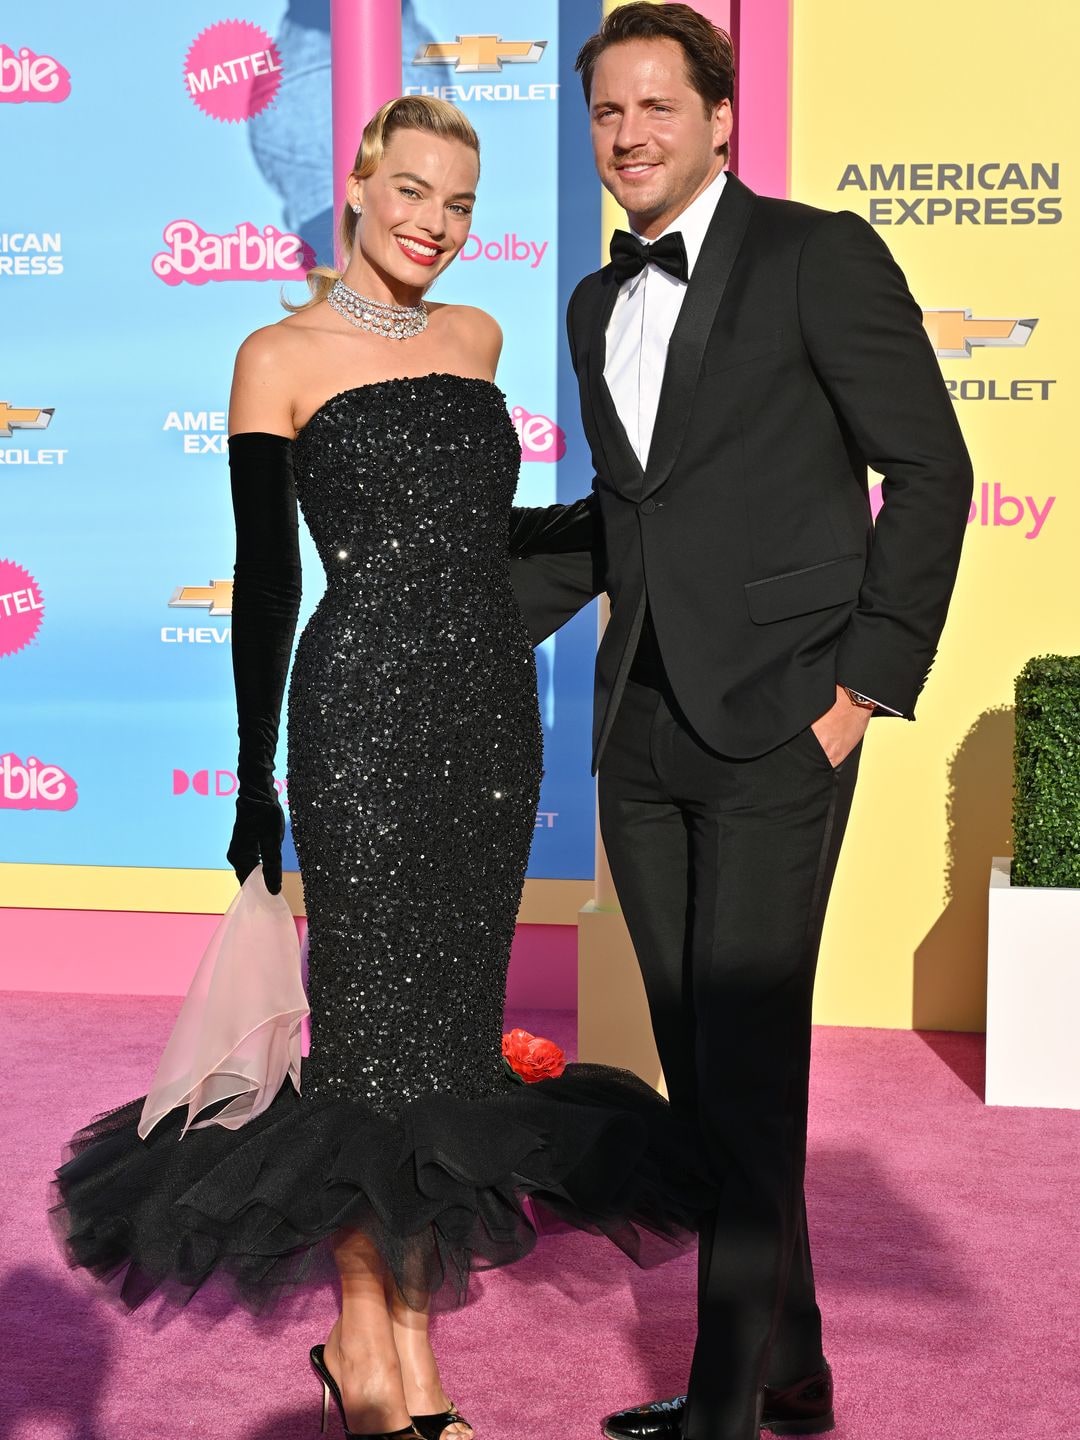 Margot Robbie and Tom Ackerley smiling on the Barbie pink carpet